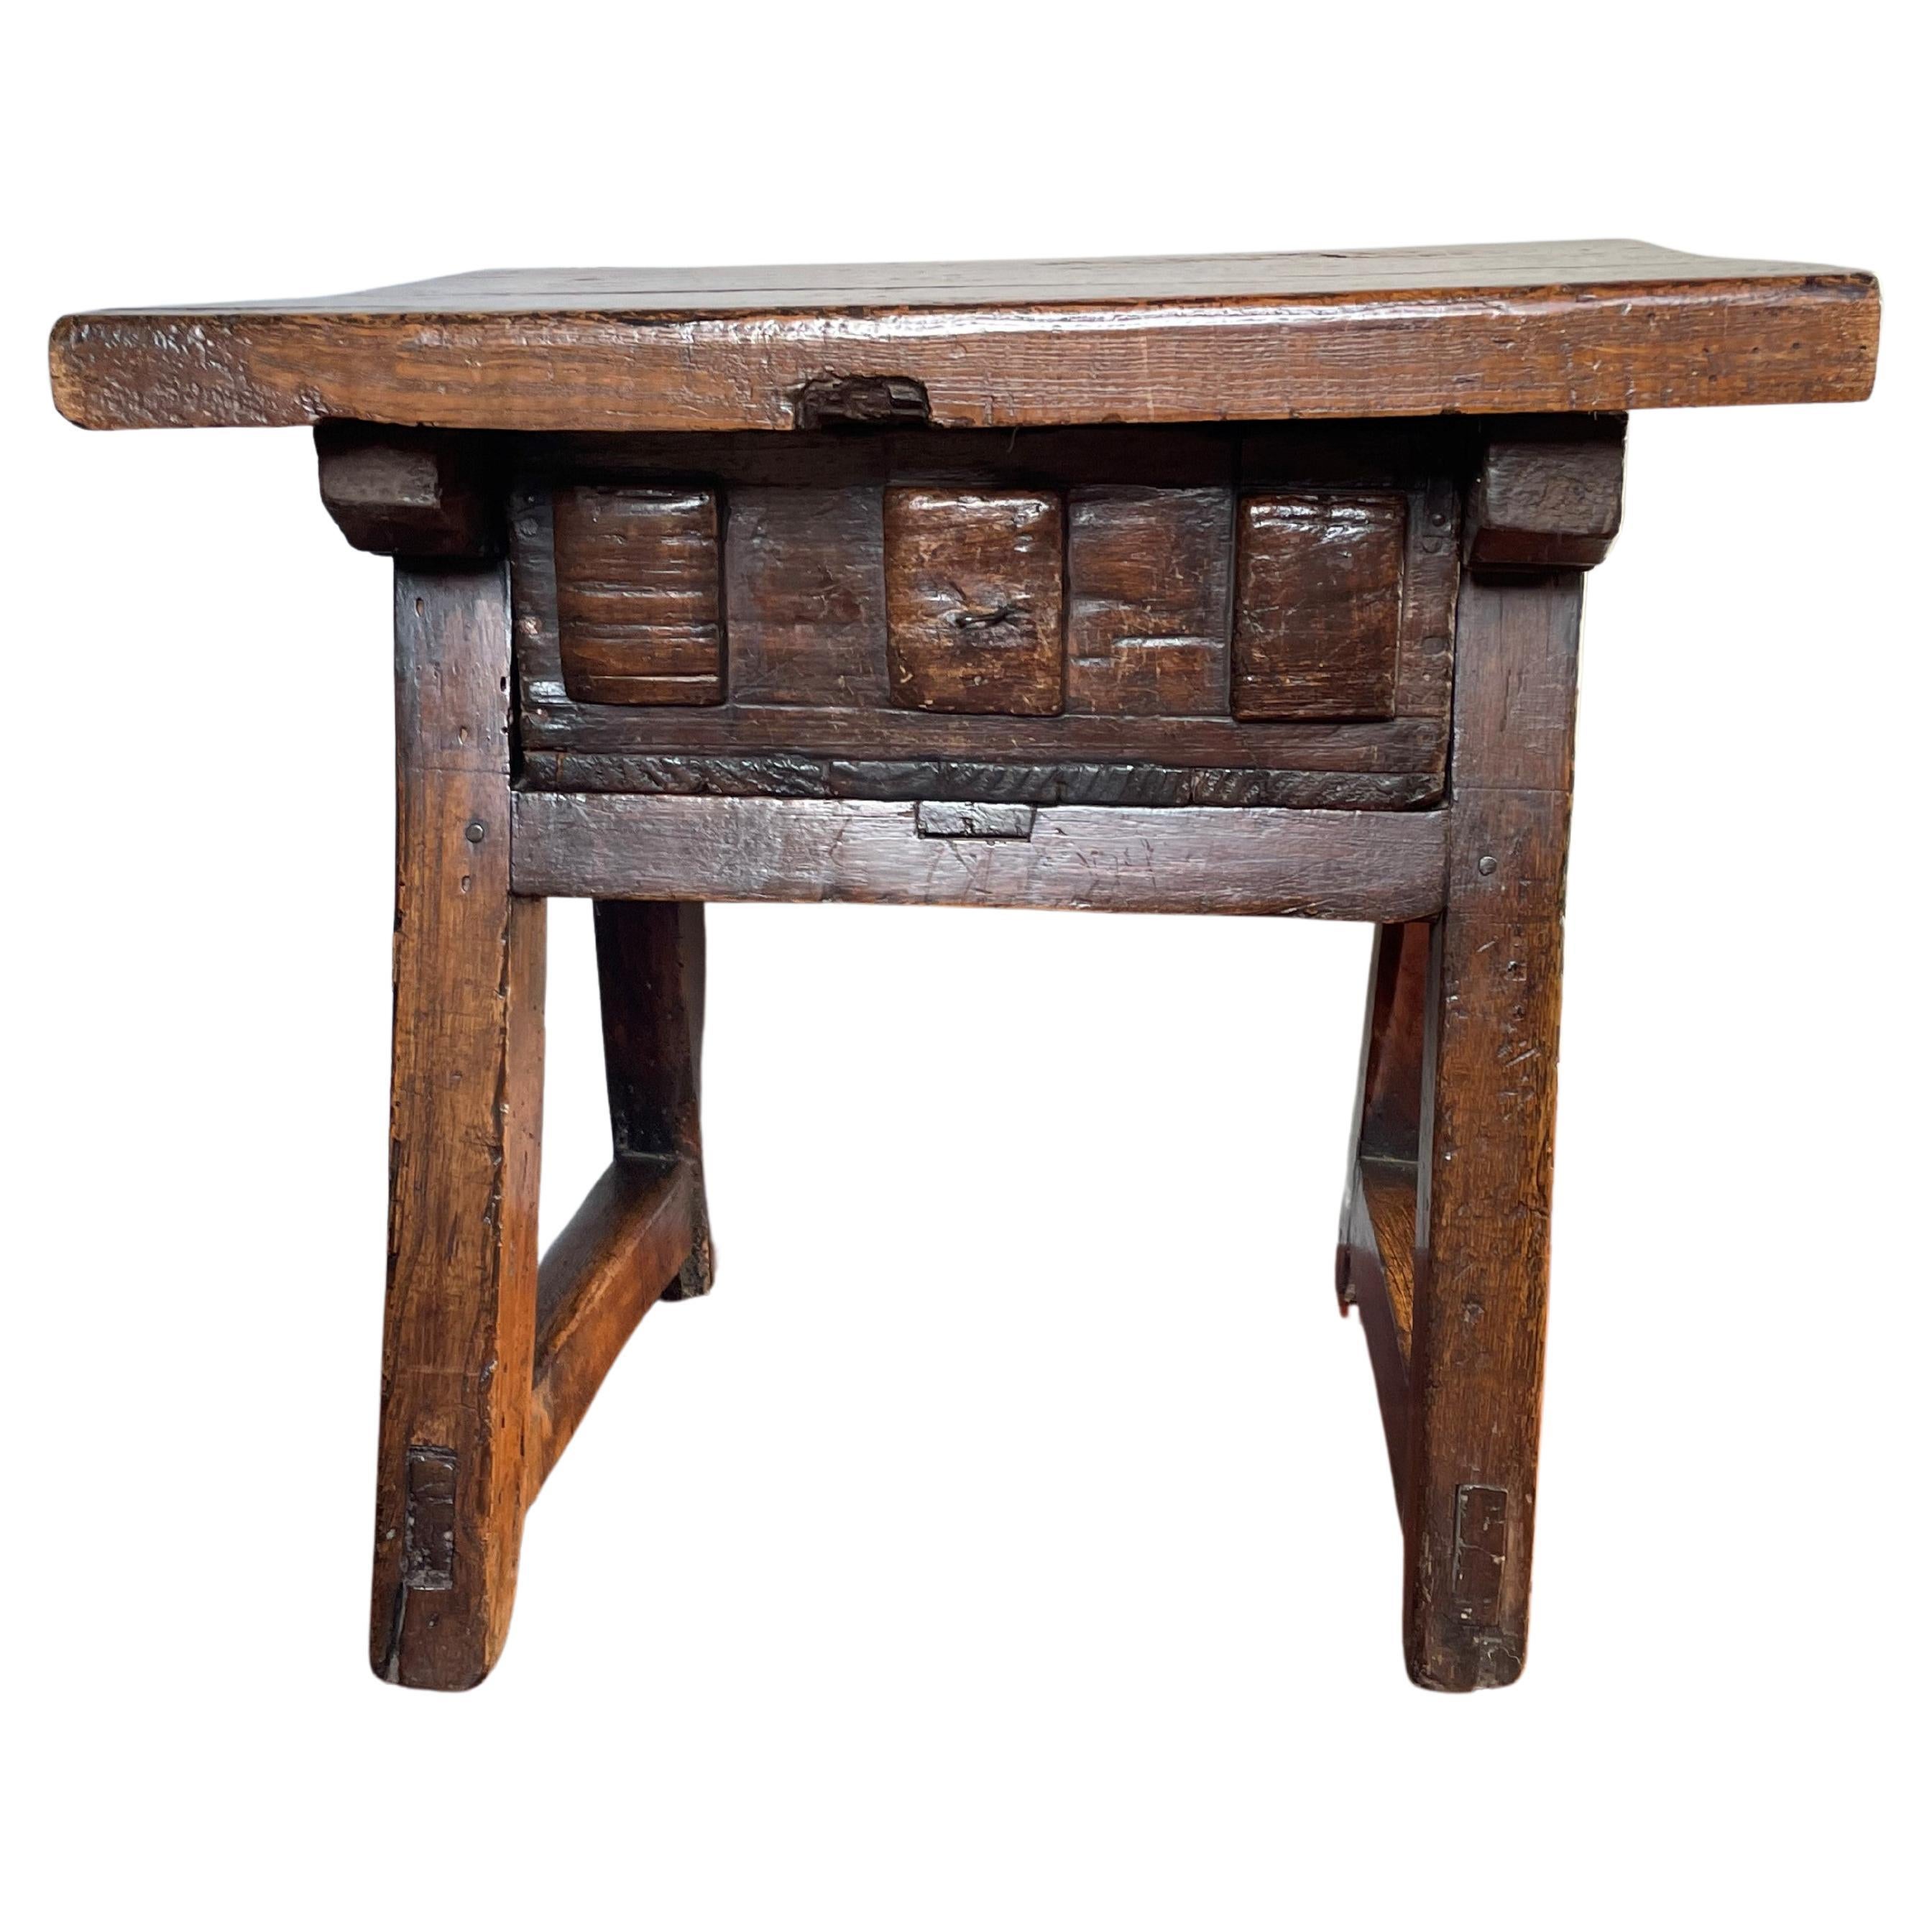 Antique & Rustic Early 1800s Wooden Spanish Countryside Pay Table with Drawer